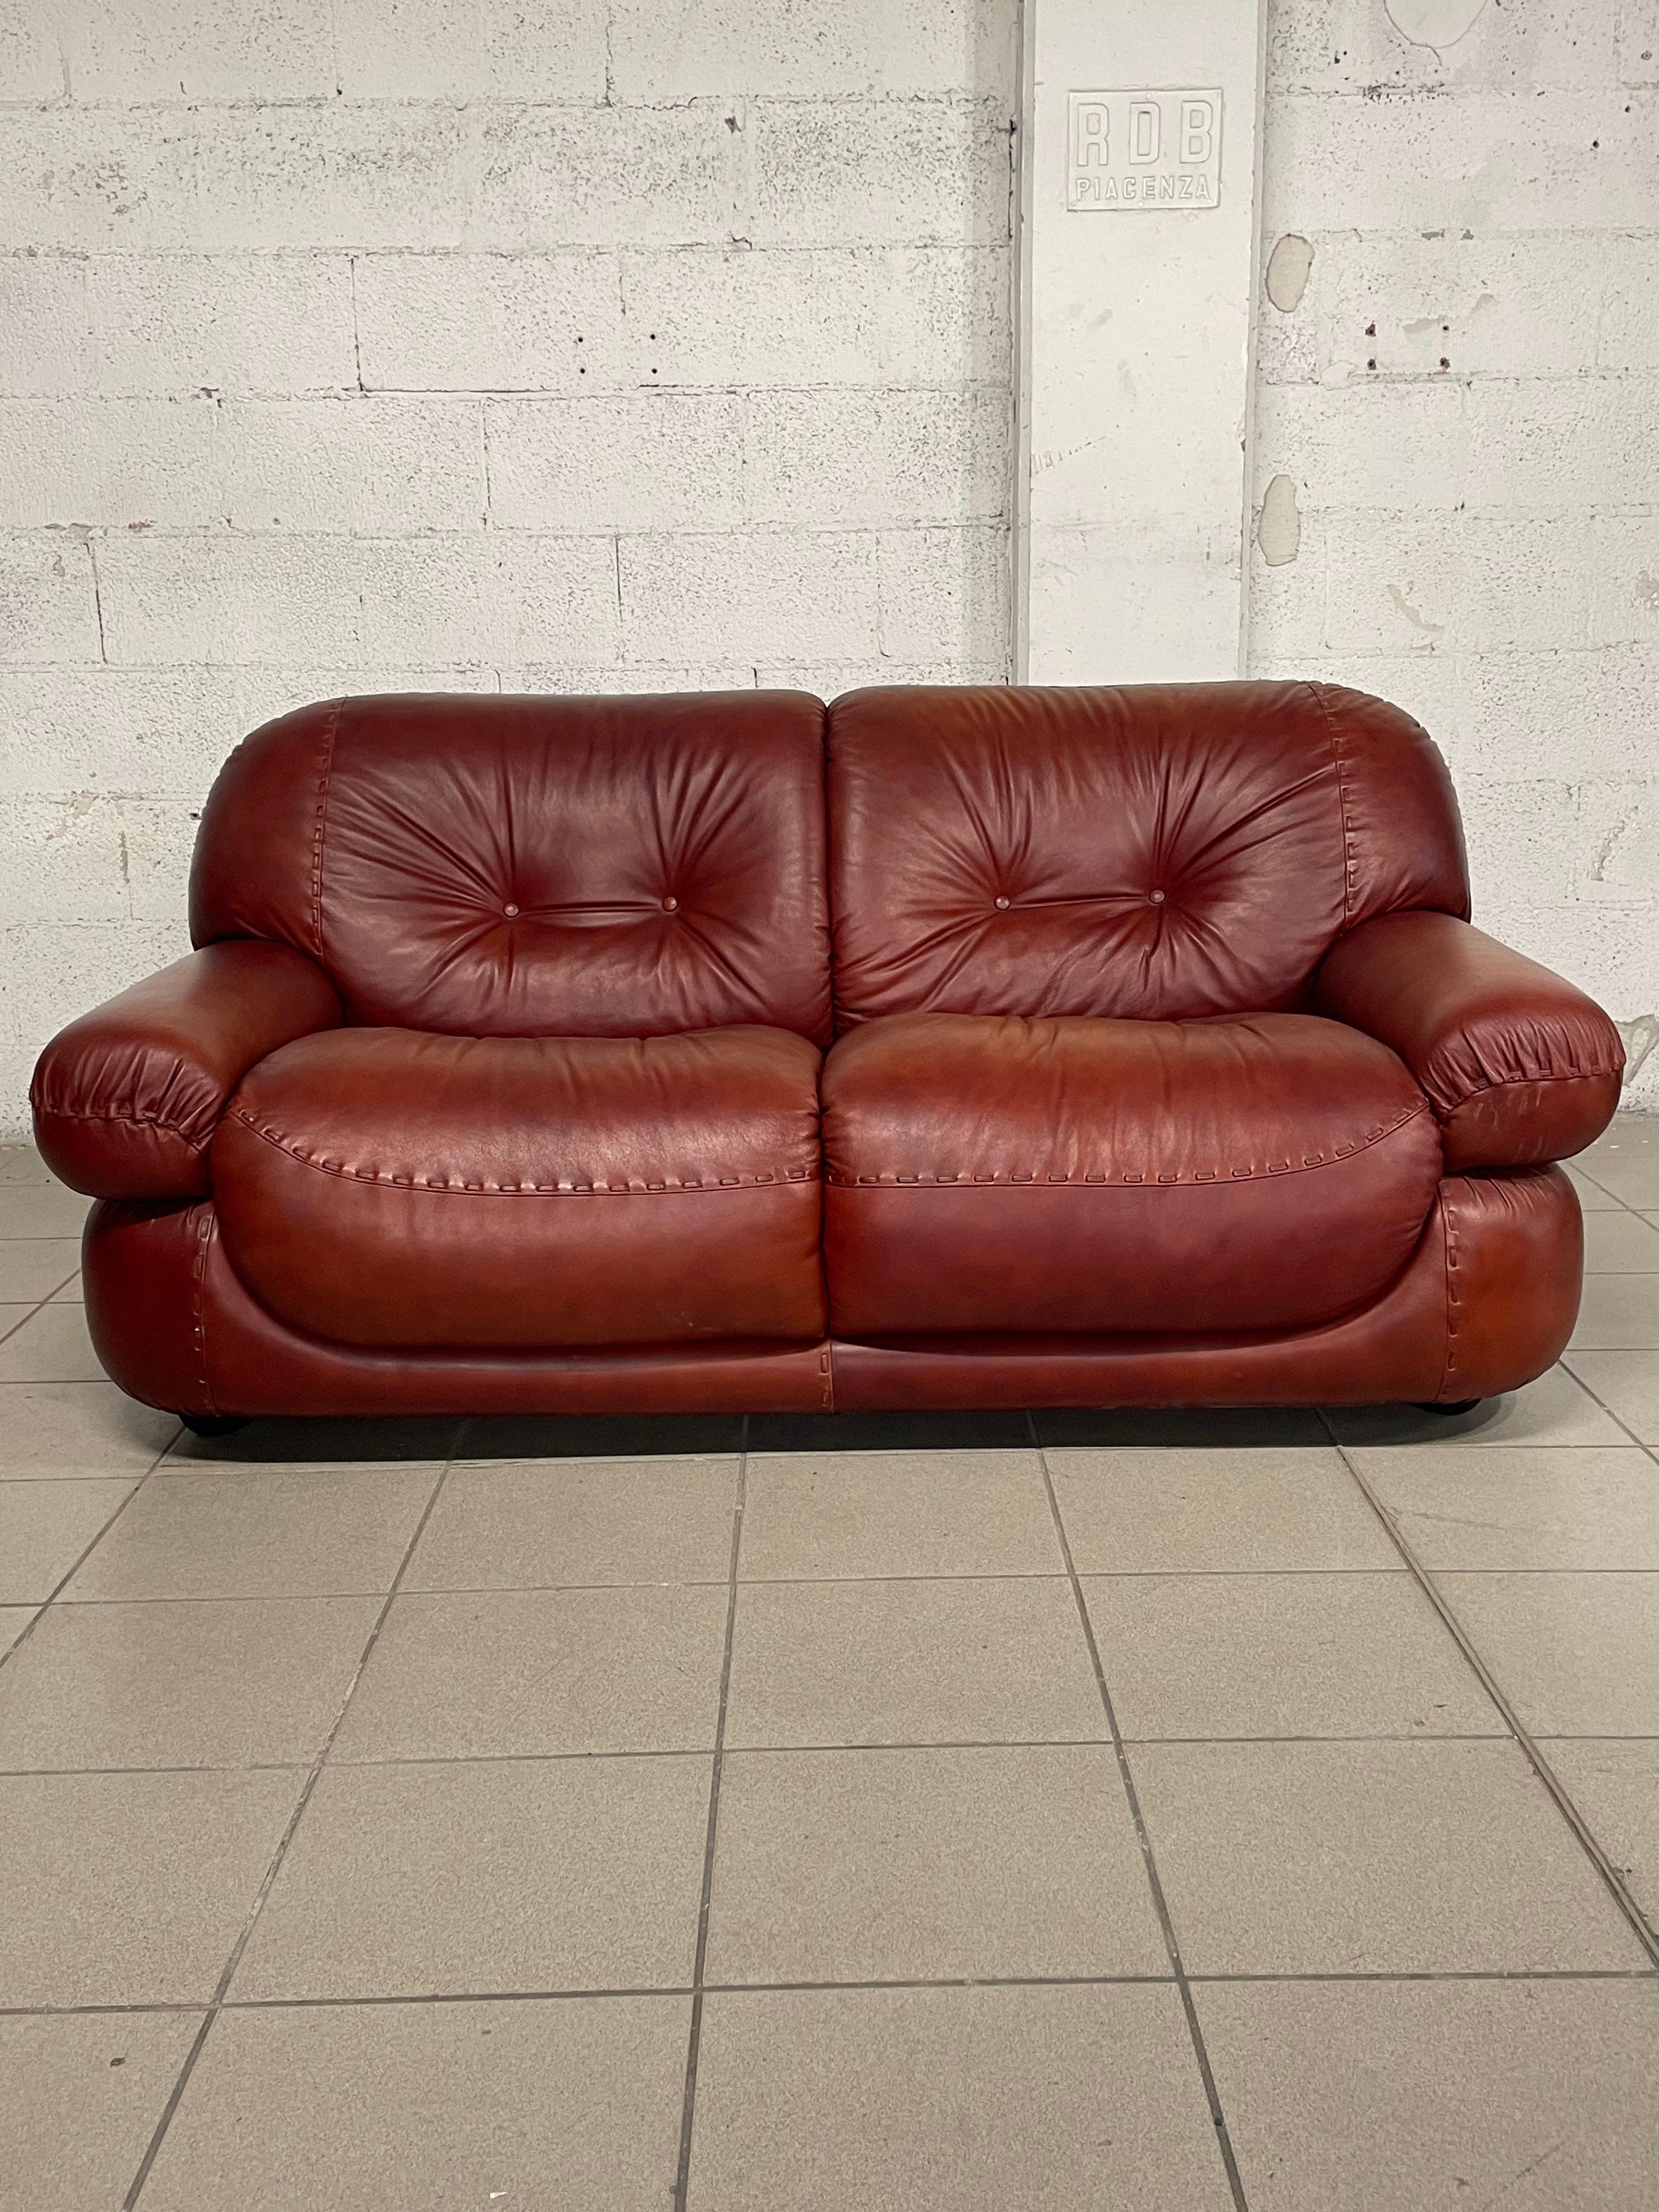 Two-seater burgundy/antique leather sofa Sapporo model produced by MOBILGIRGI (Italy) in 1970s.

Comfortable in the seat as it appears in the photo.
Soft, elegant and cozy, thanks to its rounded shapes.
The leather patina gives this sofa an extra